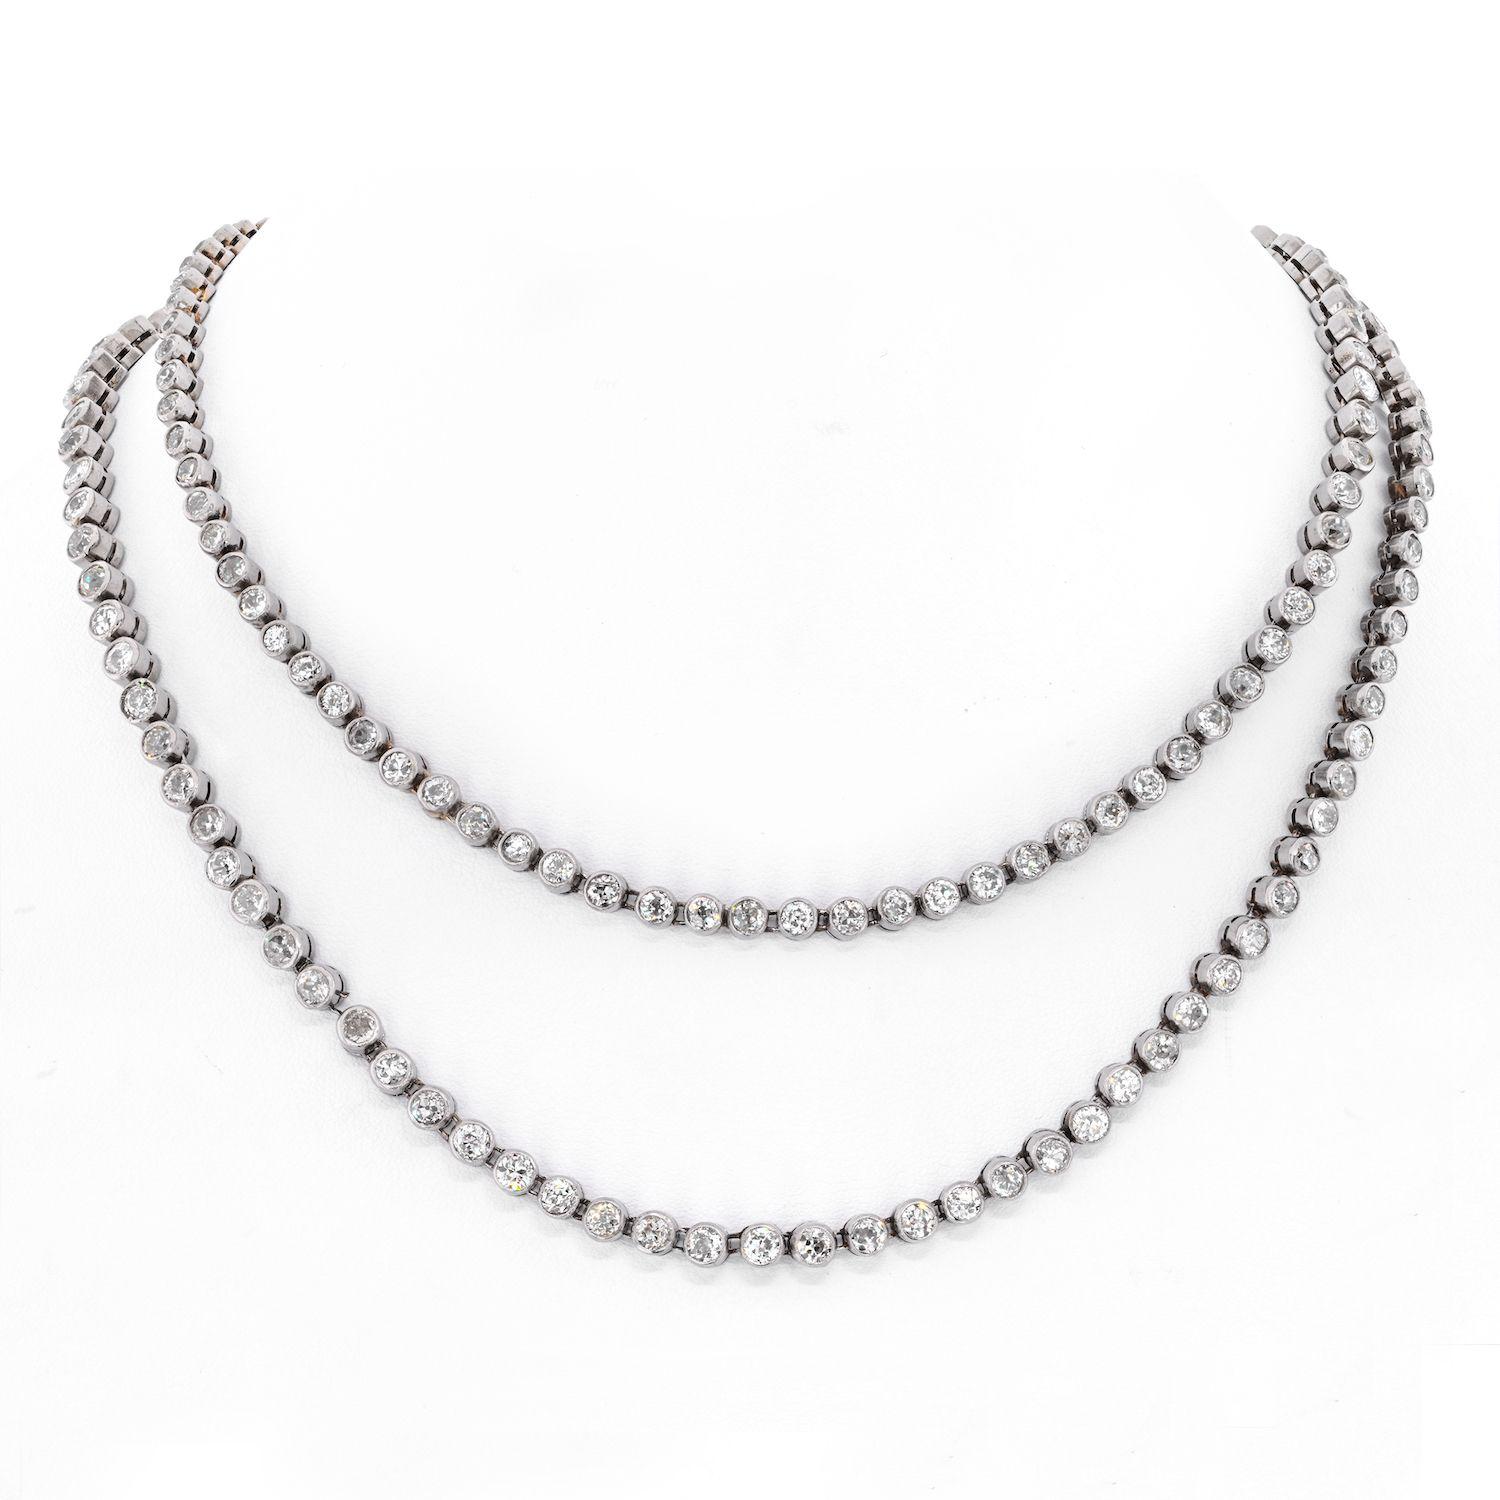 We promise you this is something that you have never seen before! A long platinum diamond tennis necklace mounted with 175 old cut diamonds. 30 carats in old world cut round cuts that glisten in every light including candle light. 
A very special